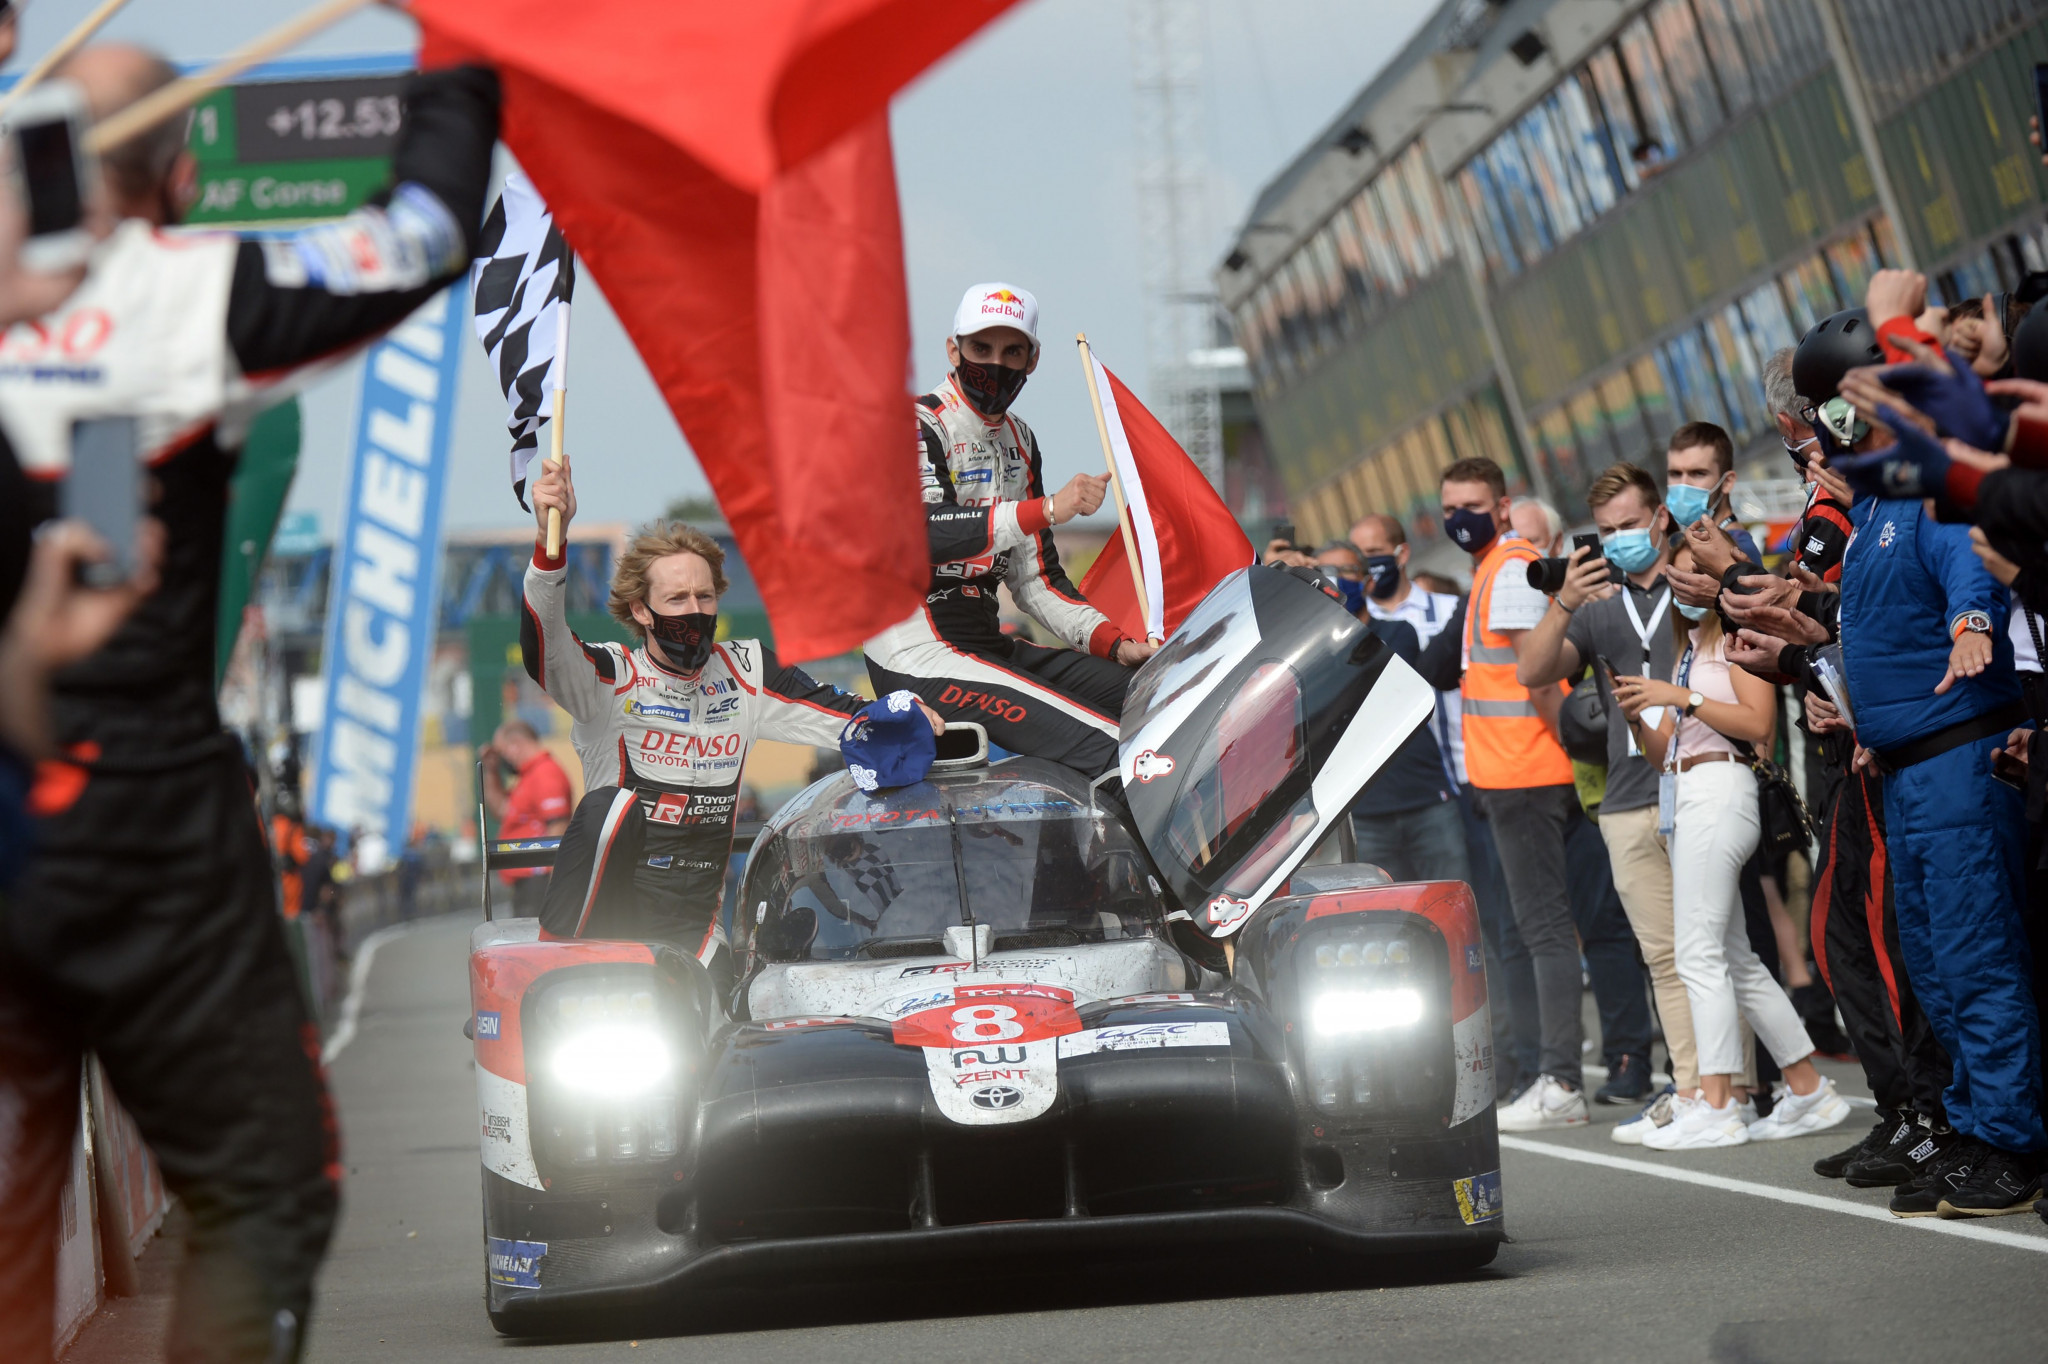 Iconic 24 Hours of Le Mans race postponed in bid to allow spectators